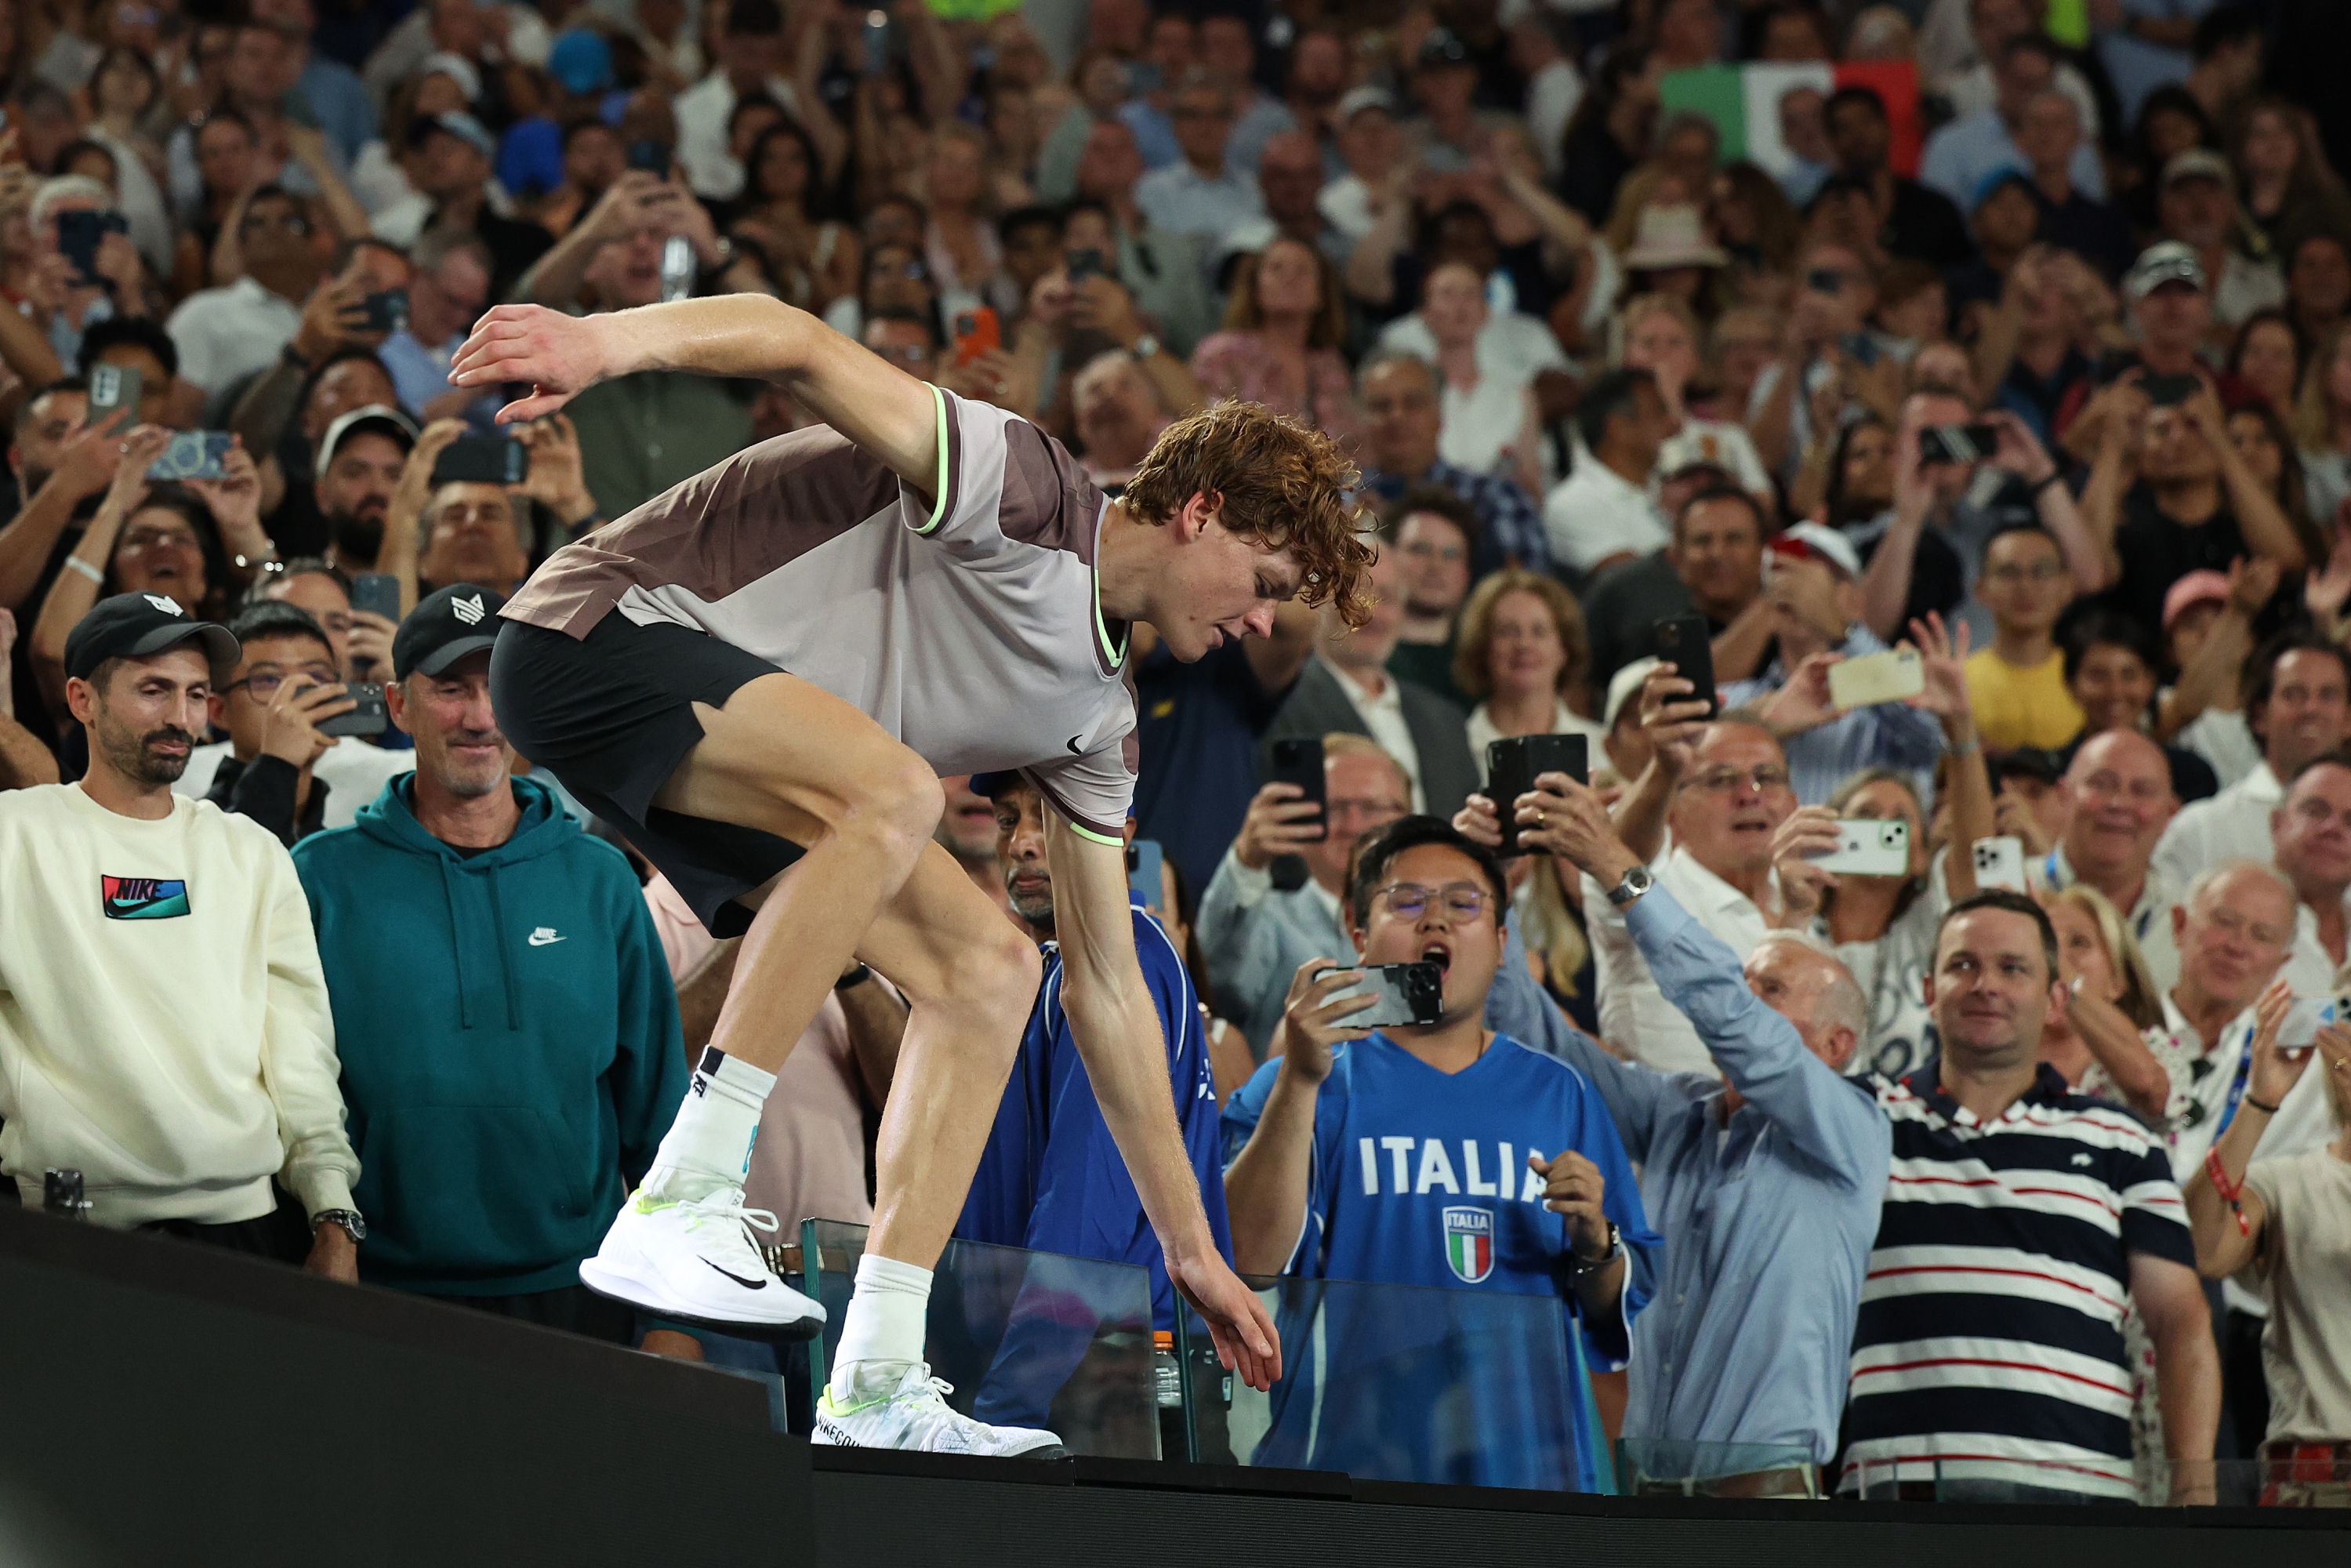 MELBOURNE, AUSTRALIA - JANUARY 28: Jannik Sinner of Italy celebrates winning with his team after their Men's Singles Final match against Daniil Medvedev during the 2024 Australian Open at Melbourne Park on January 28, 2024 in Melbourne, Australia. (Photo by Daniel Pockett/Getty Images)